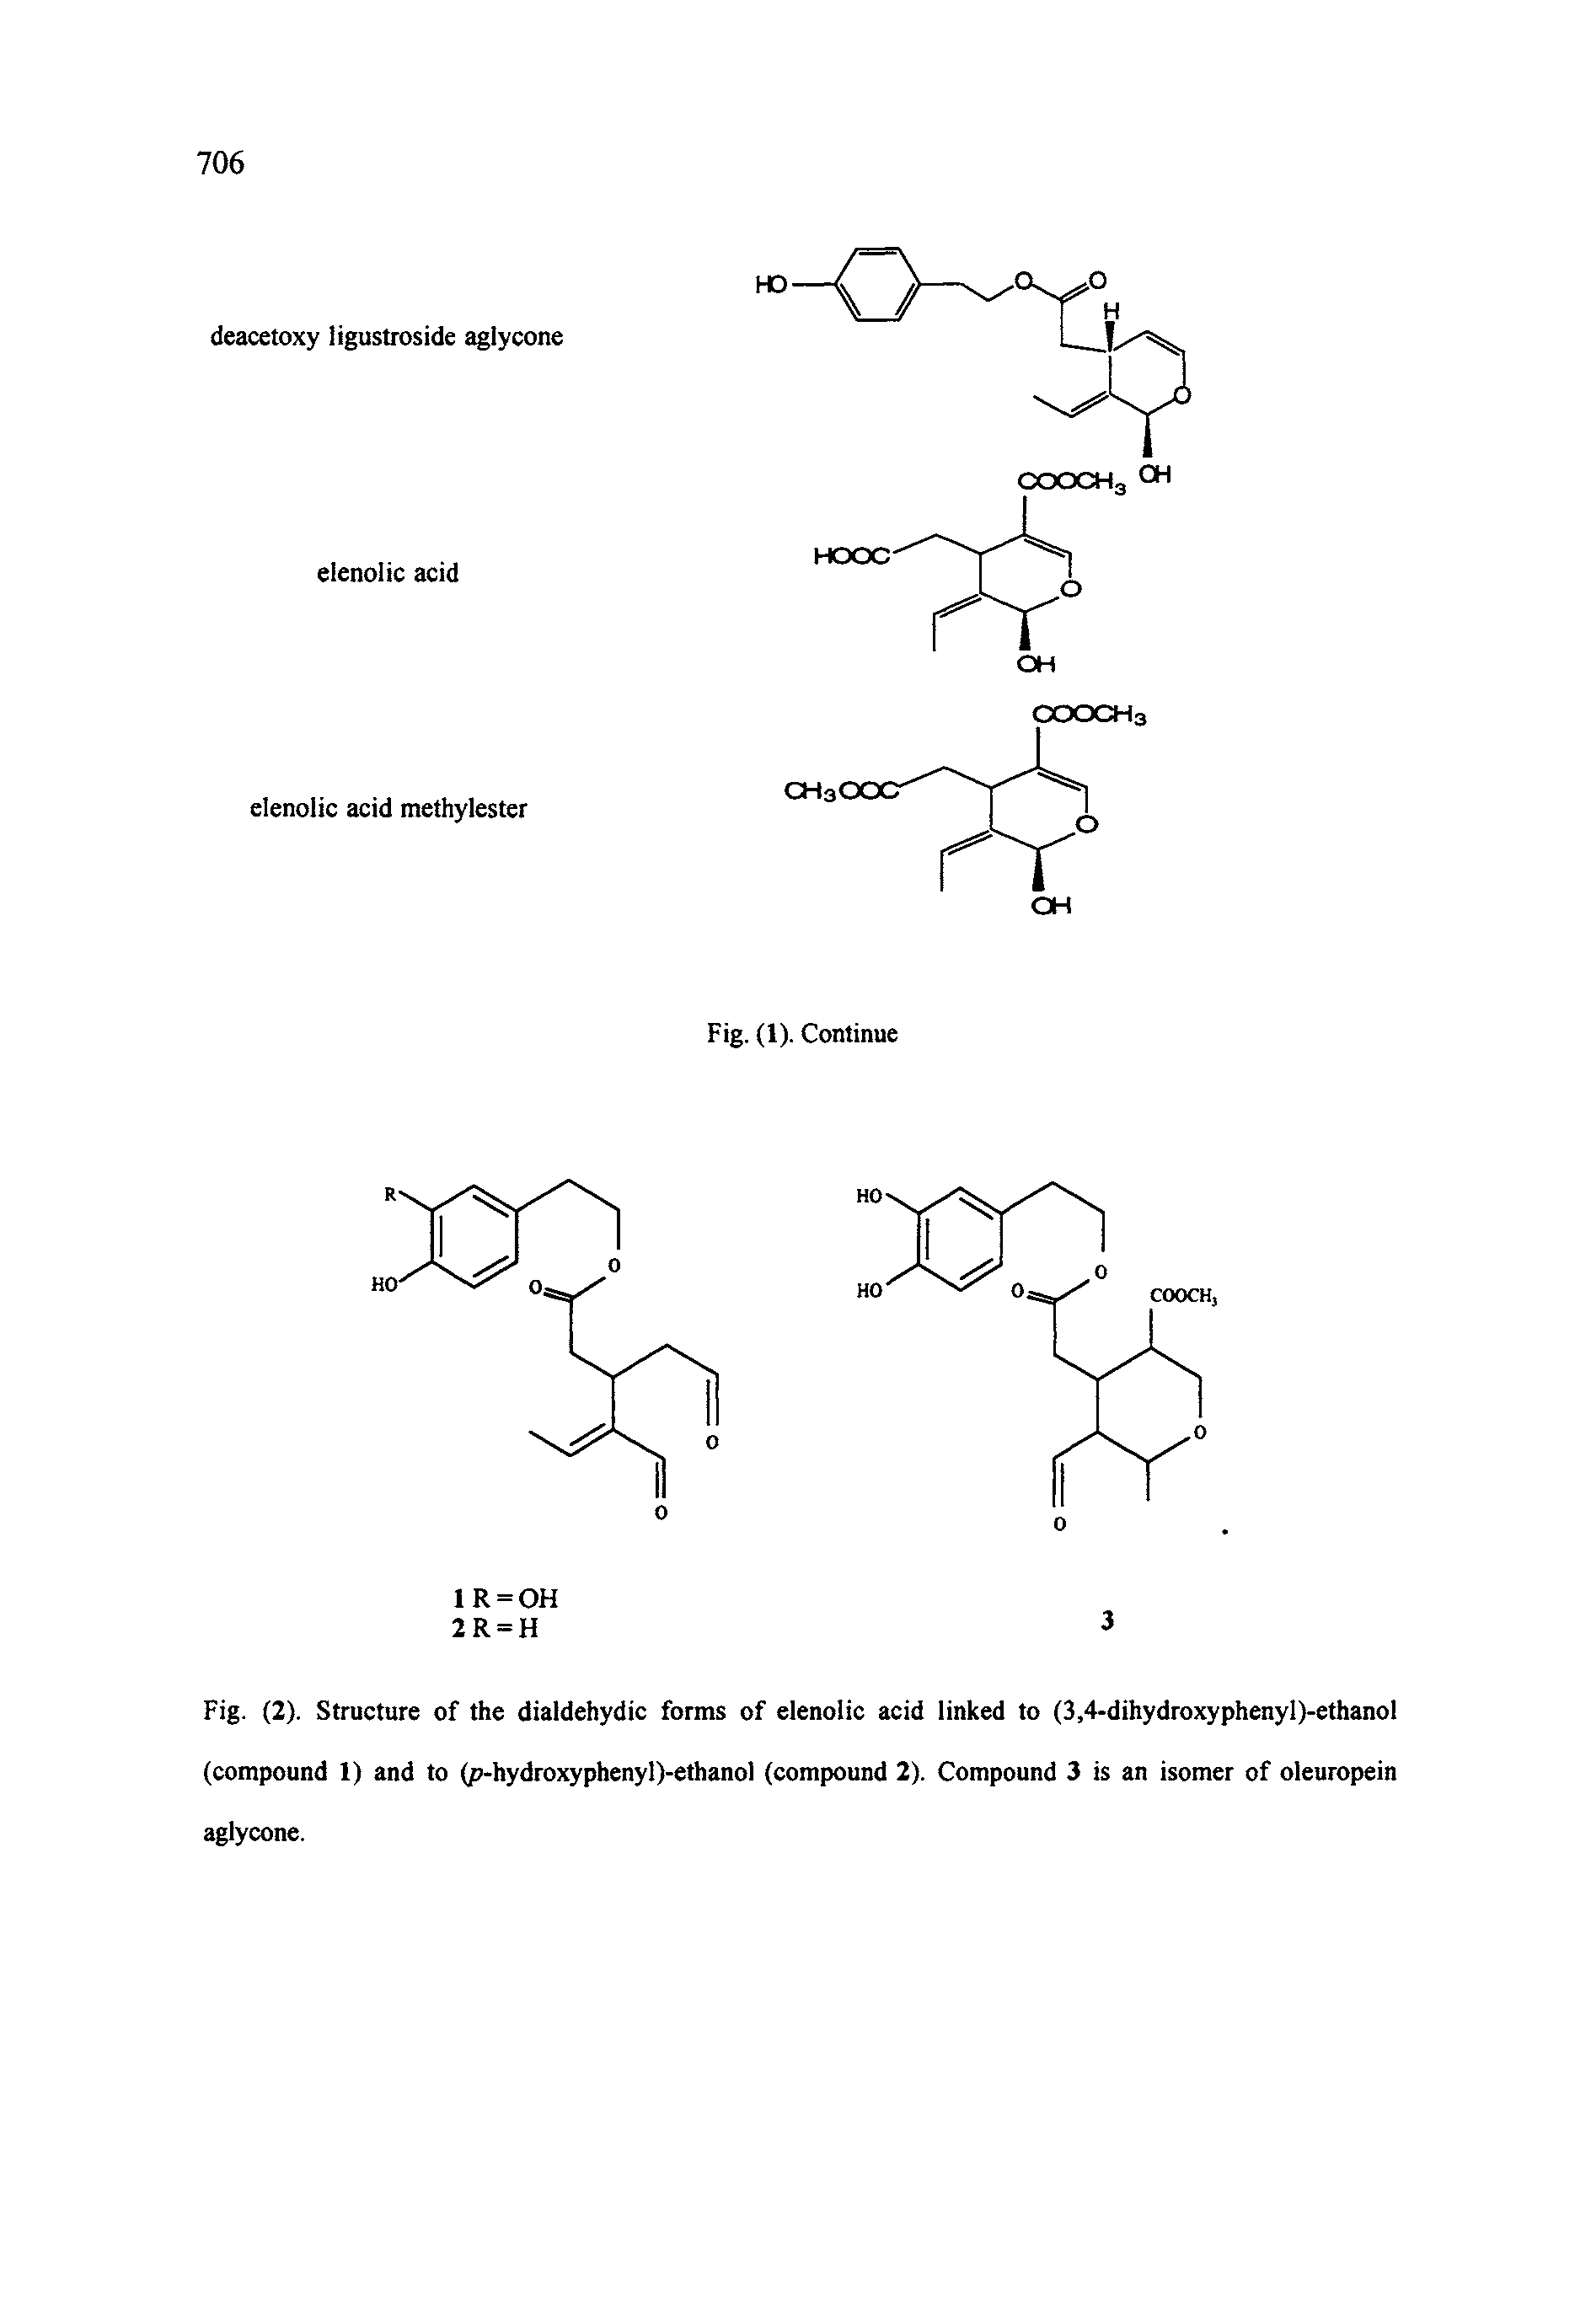 Fig. (2). Structure of the dialdehydic forms of elenolic acid linked to (3,4-dihydroxyphenyl)-ethanol (compound 1) and to (p-hydroxyphenyl)-ethanol (compound 2). Compound 3 is an isomer of oleuropein aglycone.